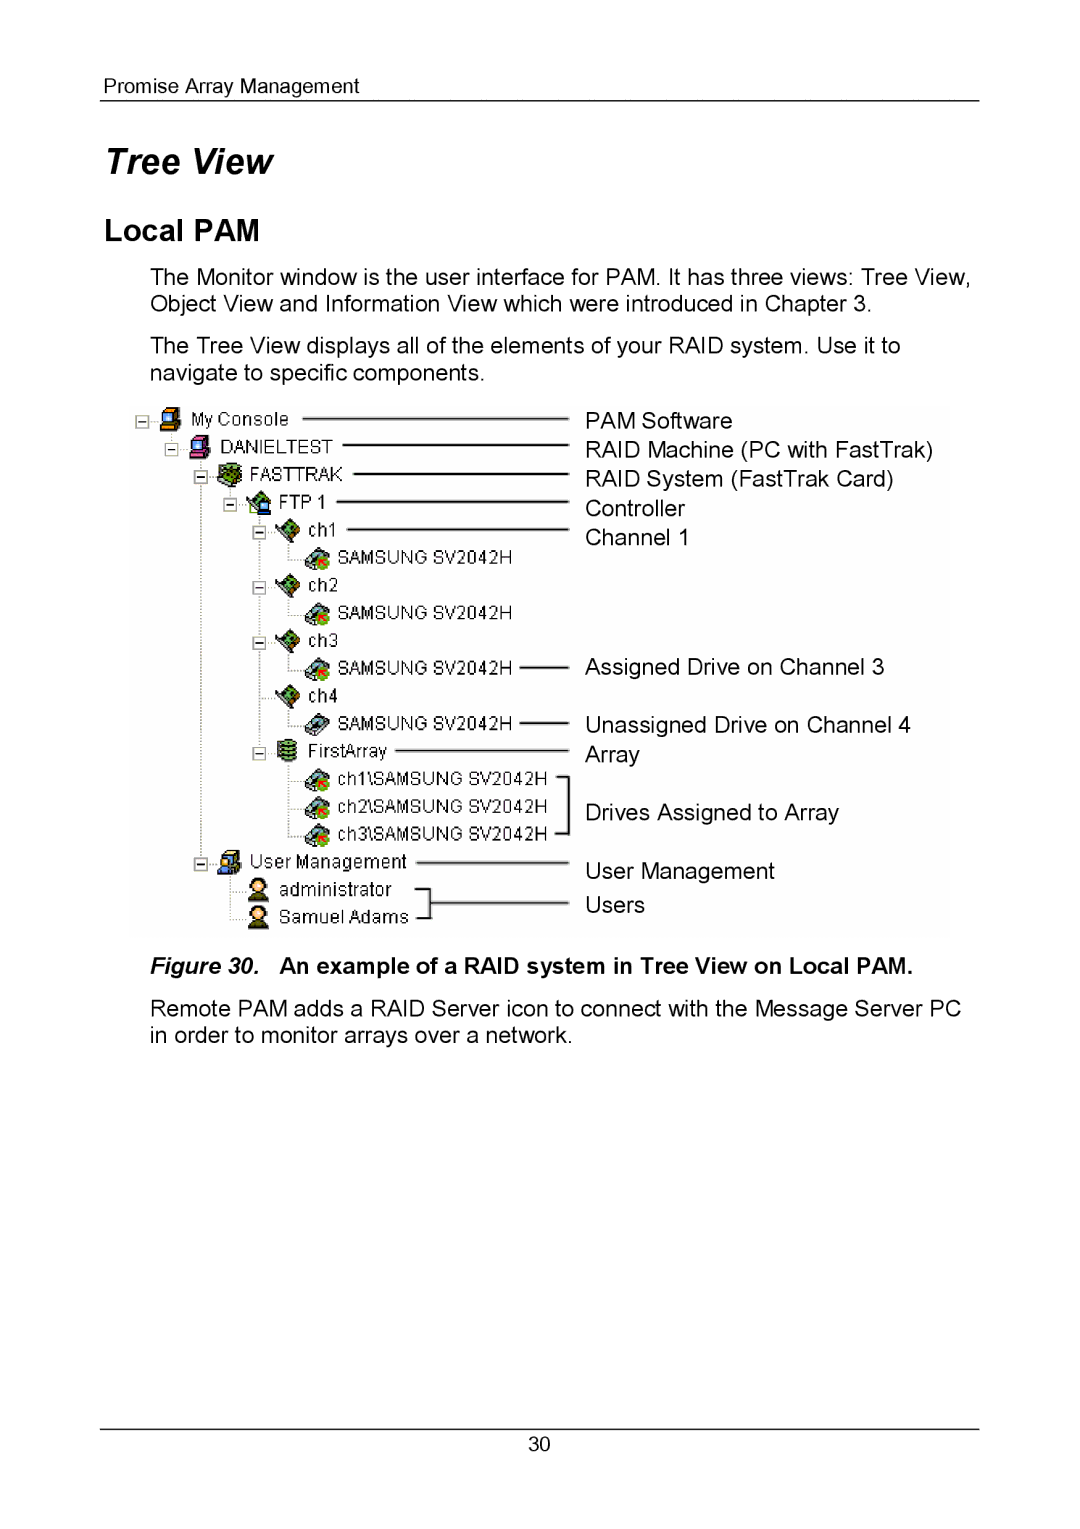 Promise Technology Version 4.4 user manual Tree View, Local PAM 